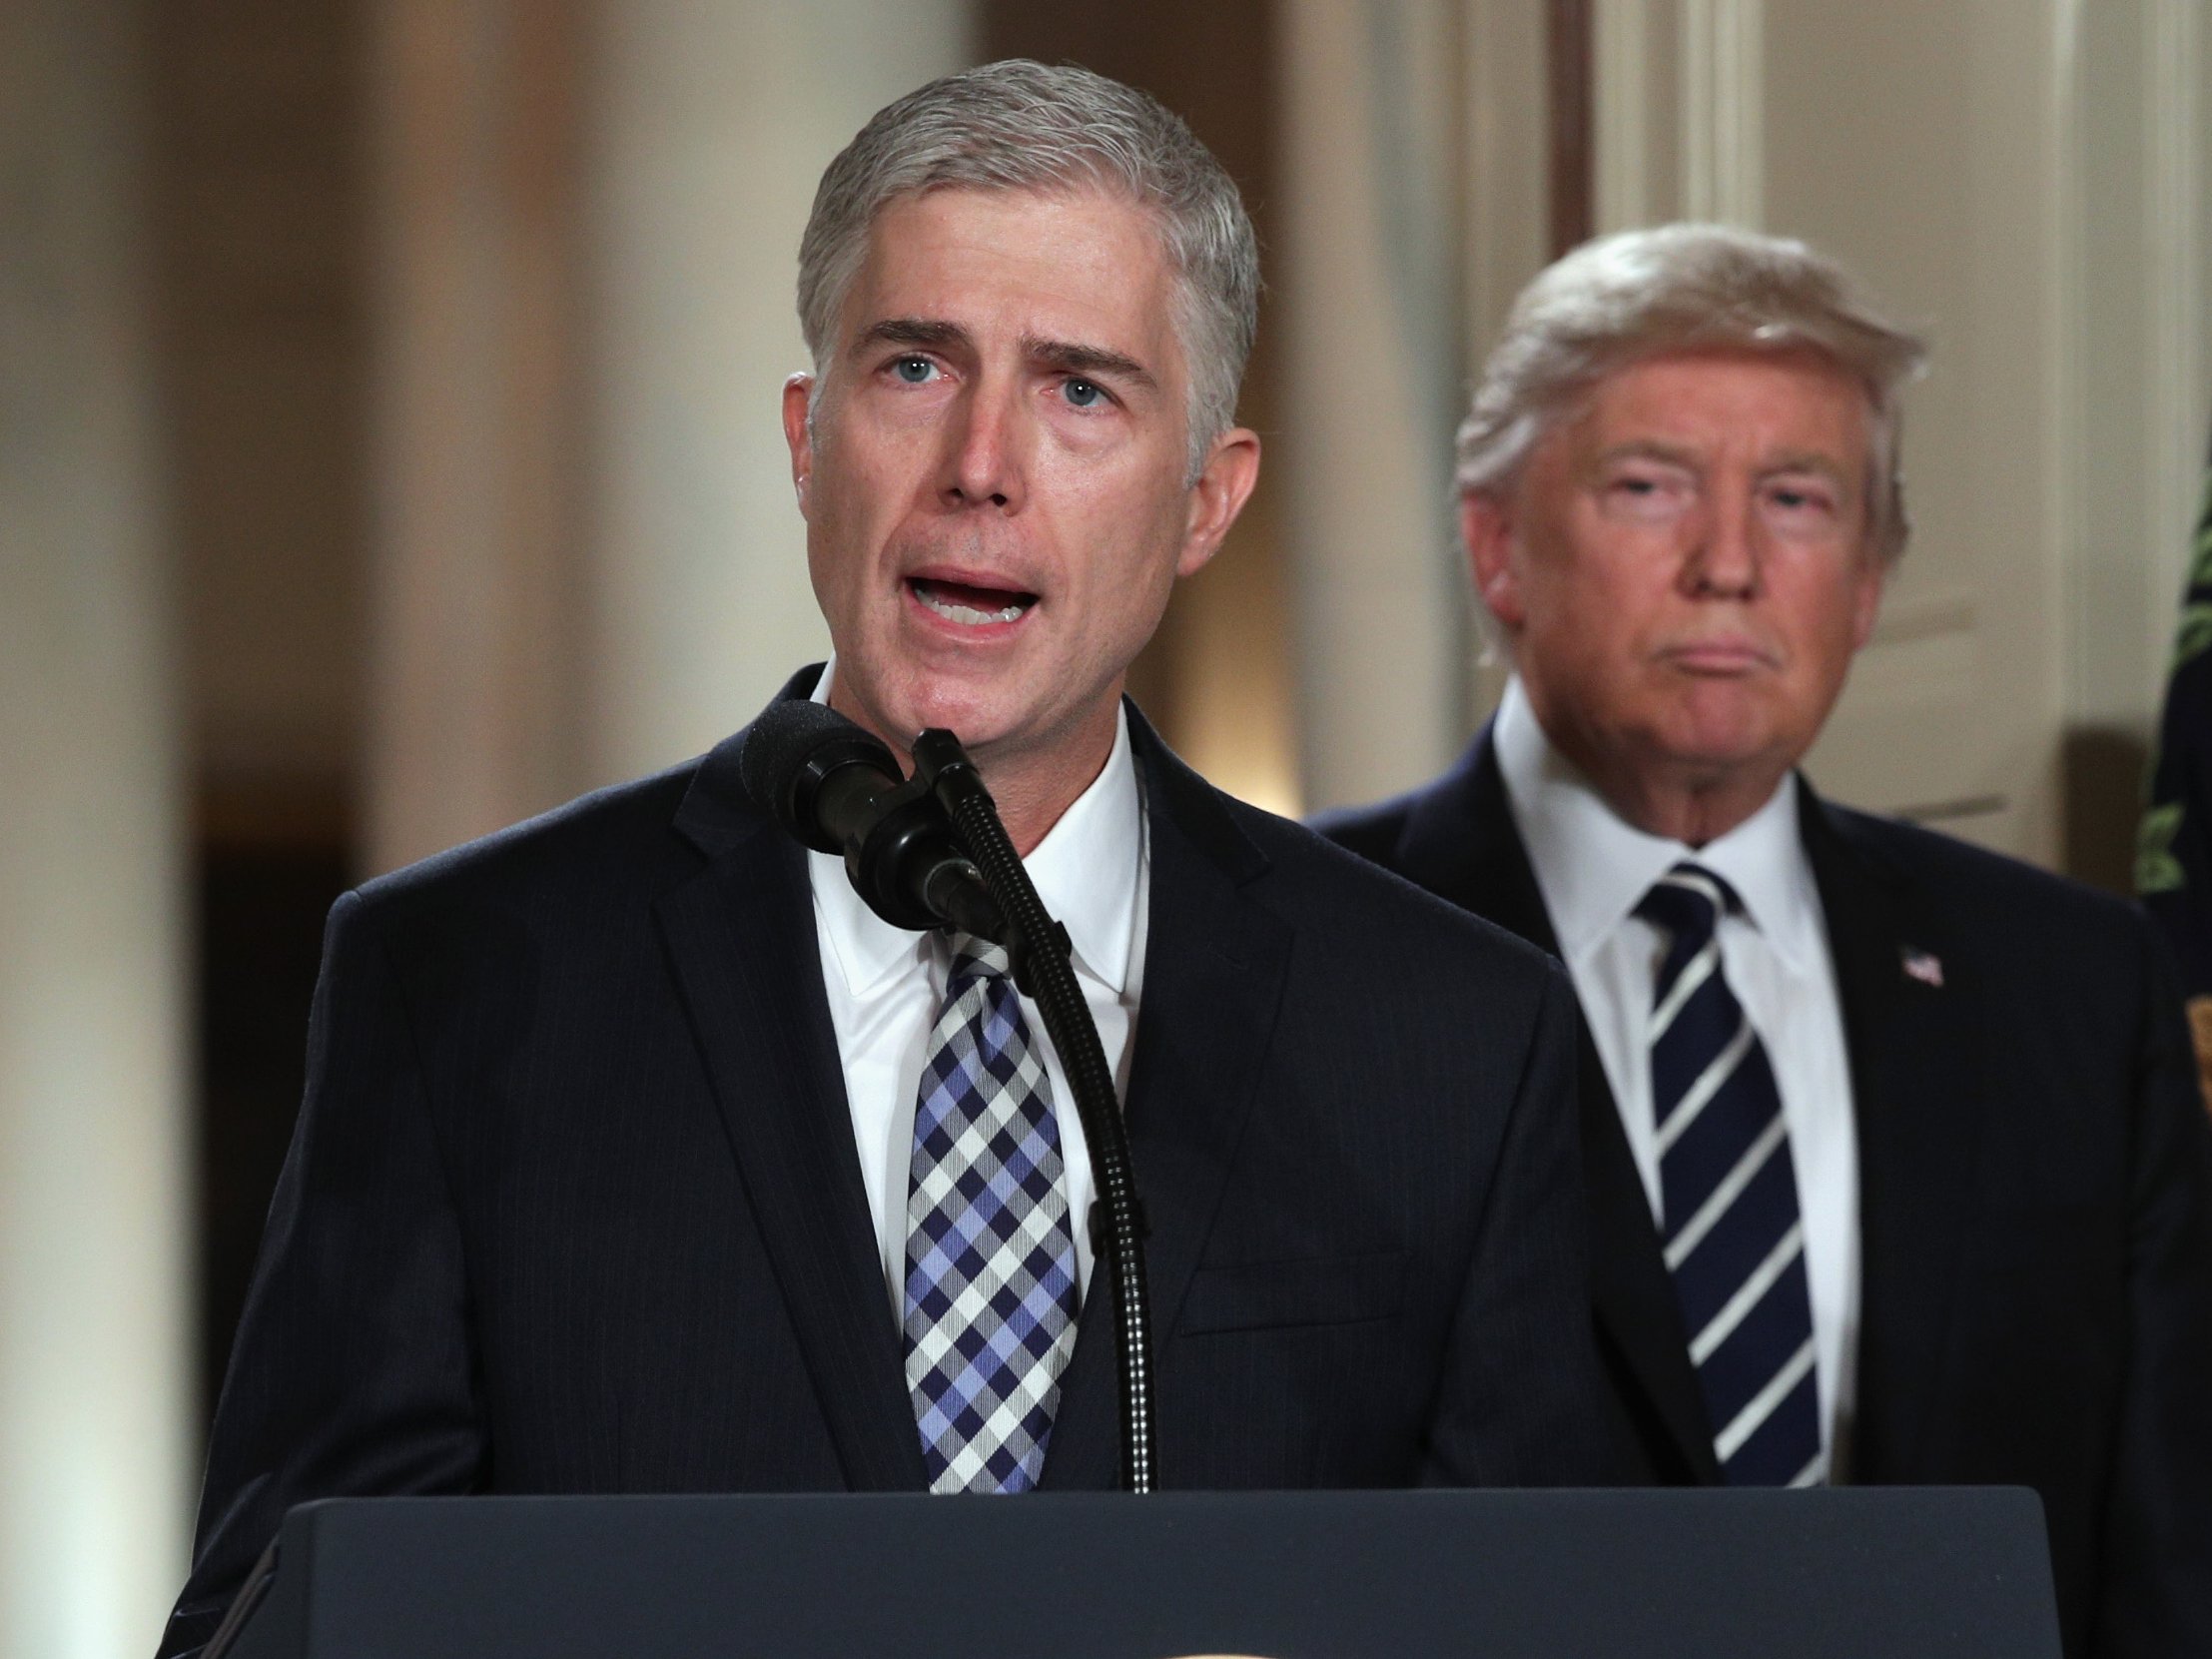 Trump picks Neil Gorsuch as nominee for Supreme Court